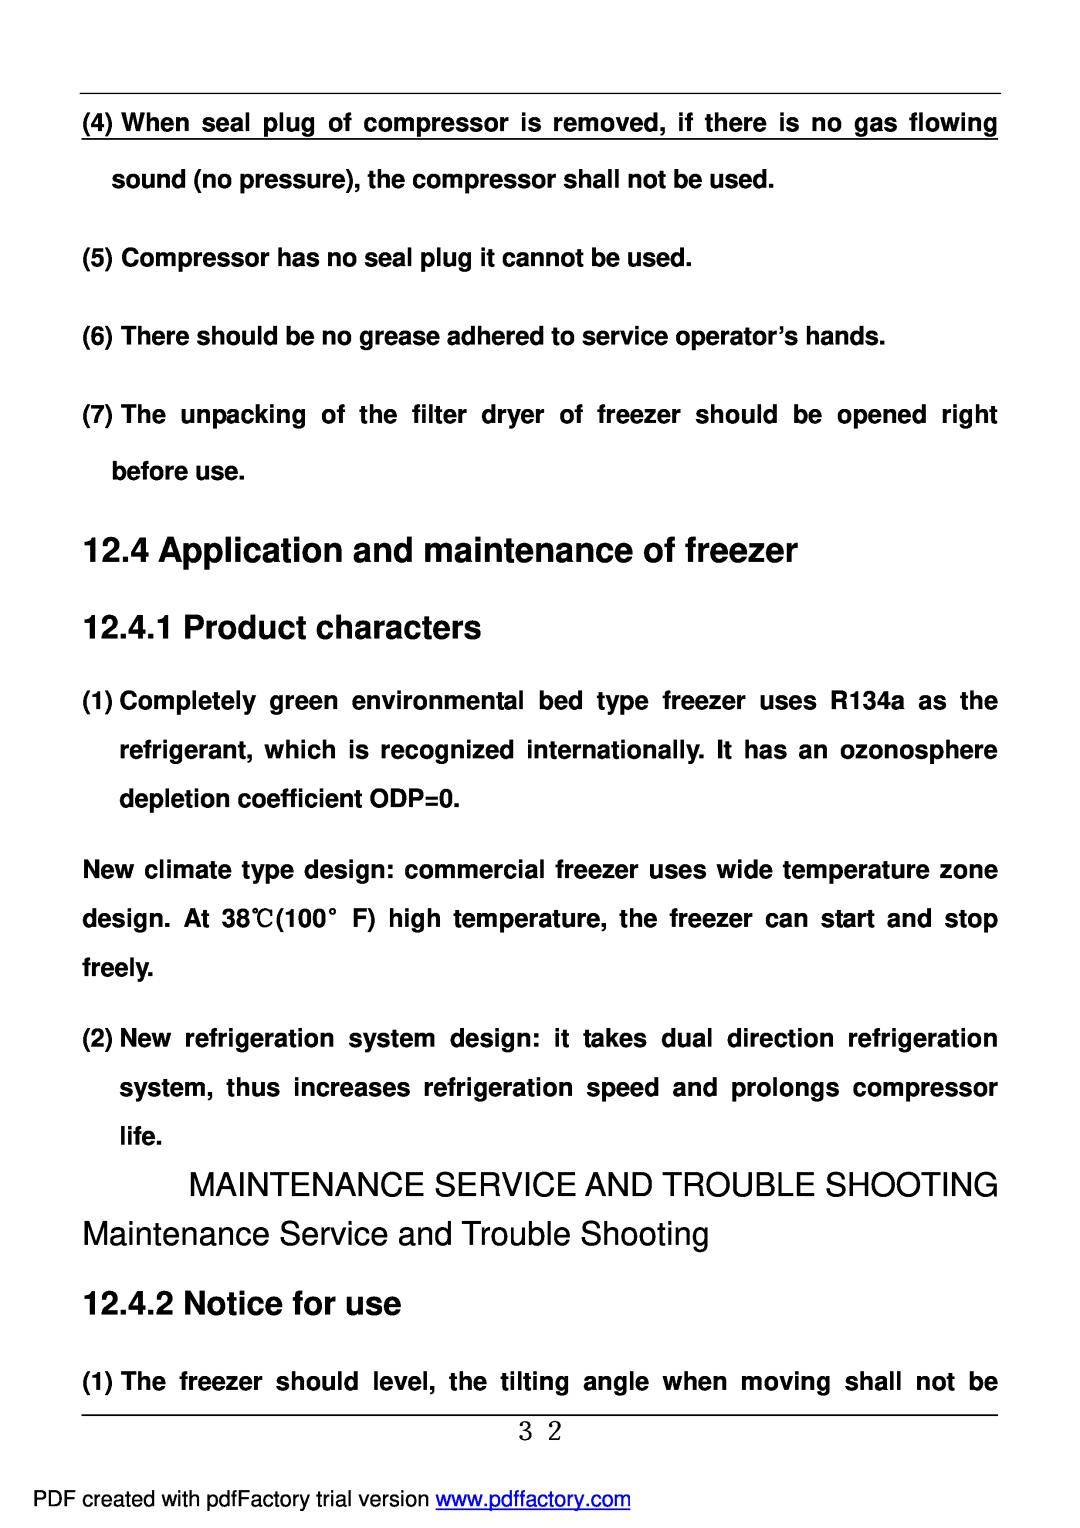 Haier BD-478A service manual Application and maintenance of freezer, Product characters, Notice for use 